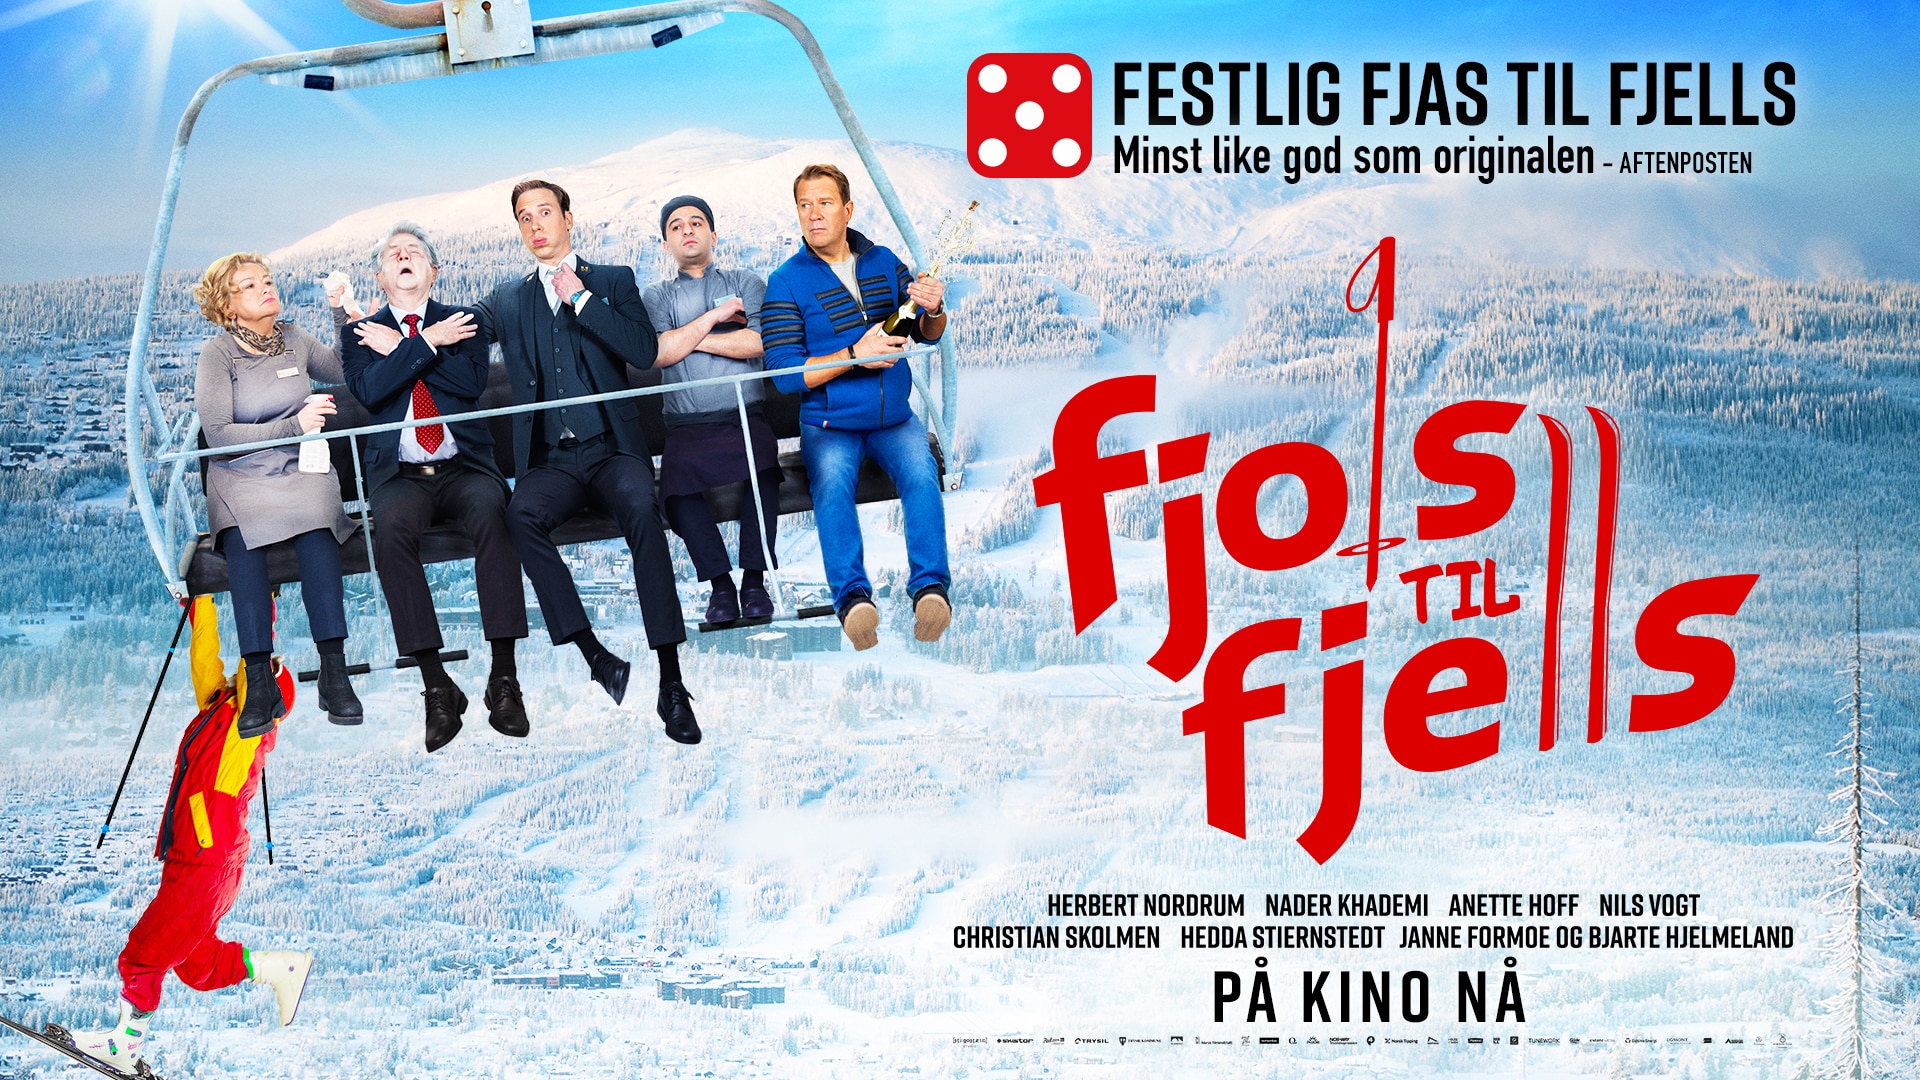 Five people sitting and one person hanging from the bottom of a chair lift on the promotional poster for movie Fjols til fjells.